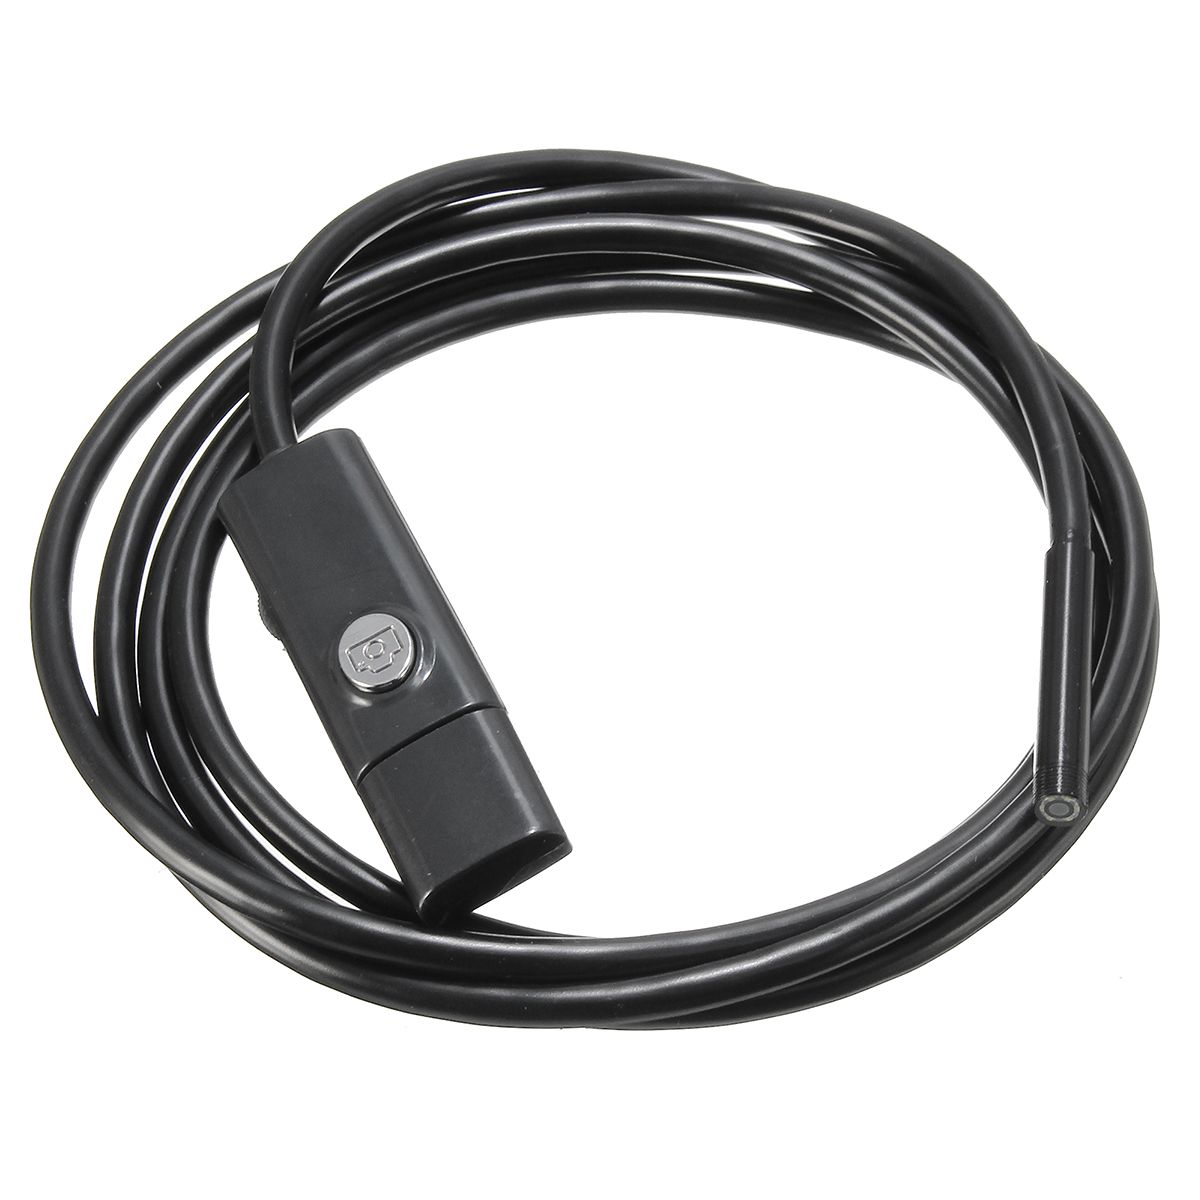 Waterproof-IP67-6-LED-55mm-Lens-USB-Wire-Borescope-Camera-Inspection-Borescope-Tube-Camera-for-Andro-1068395